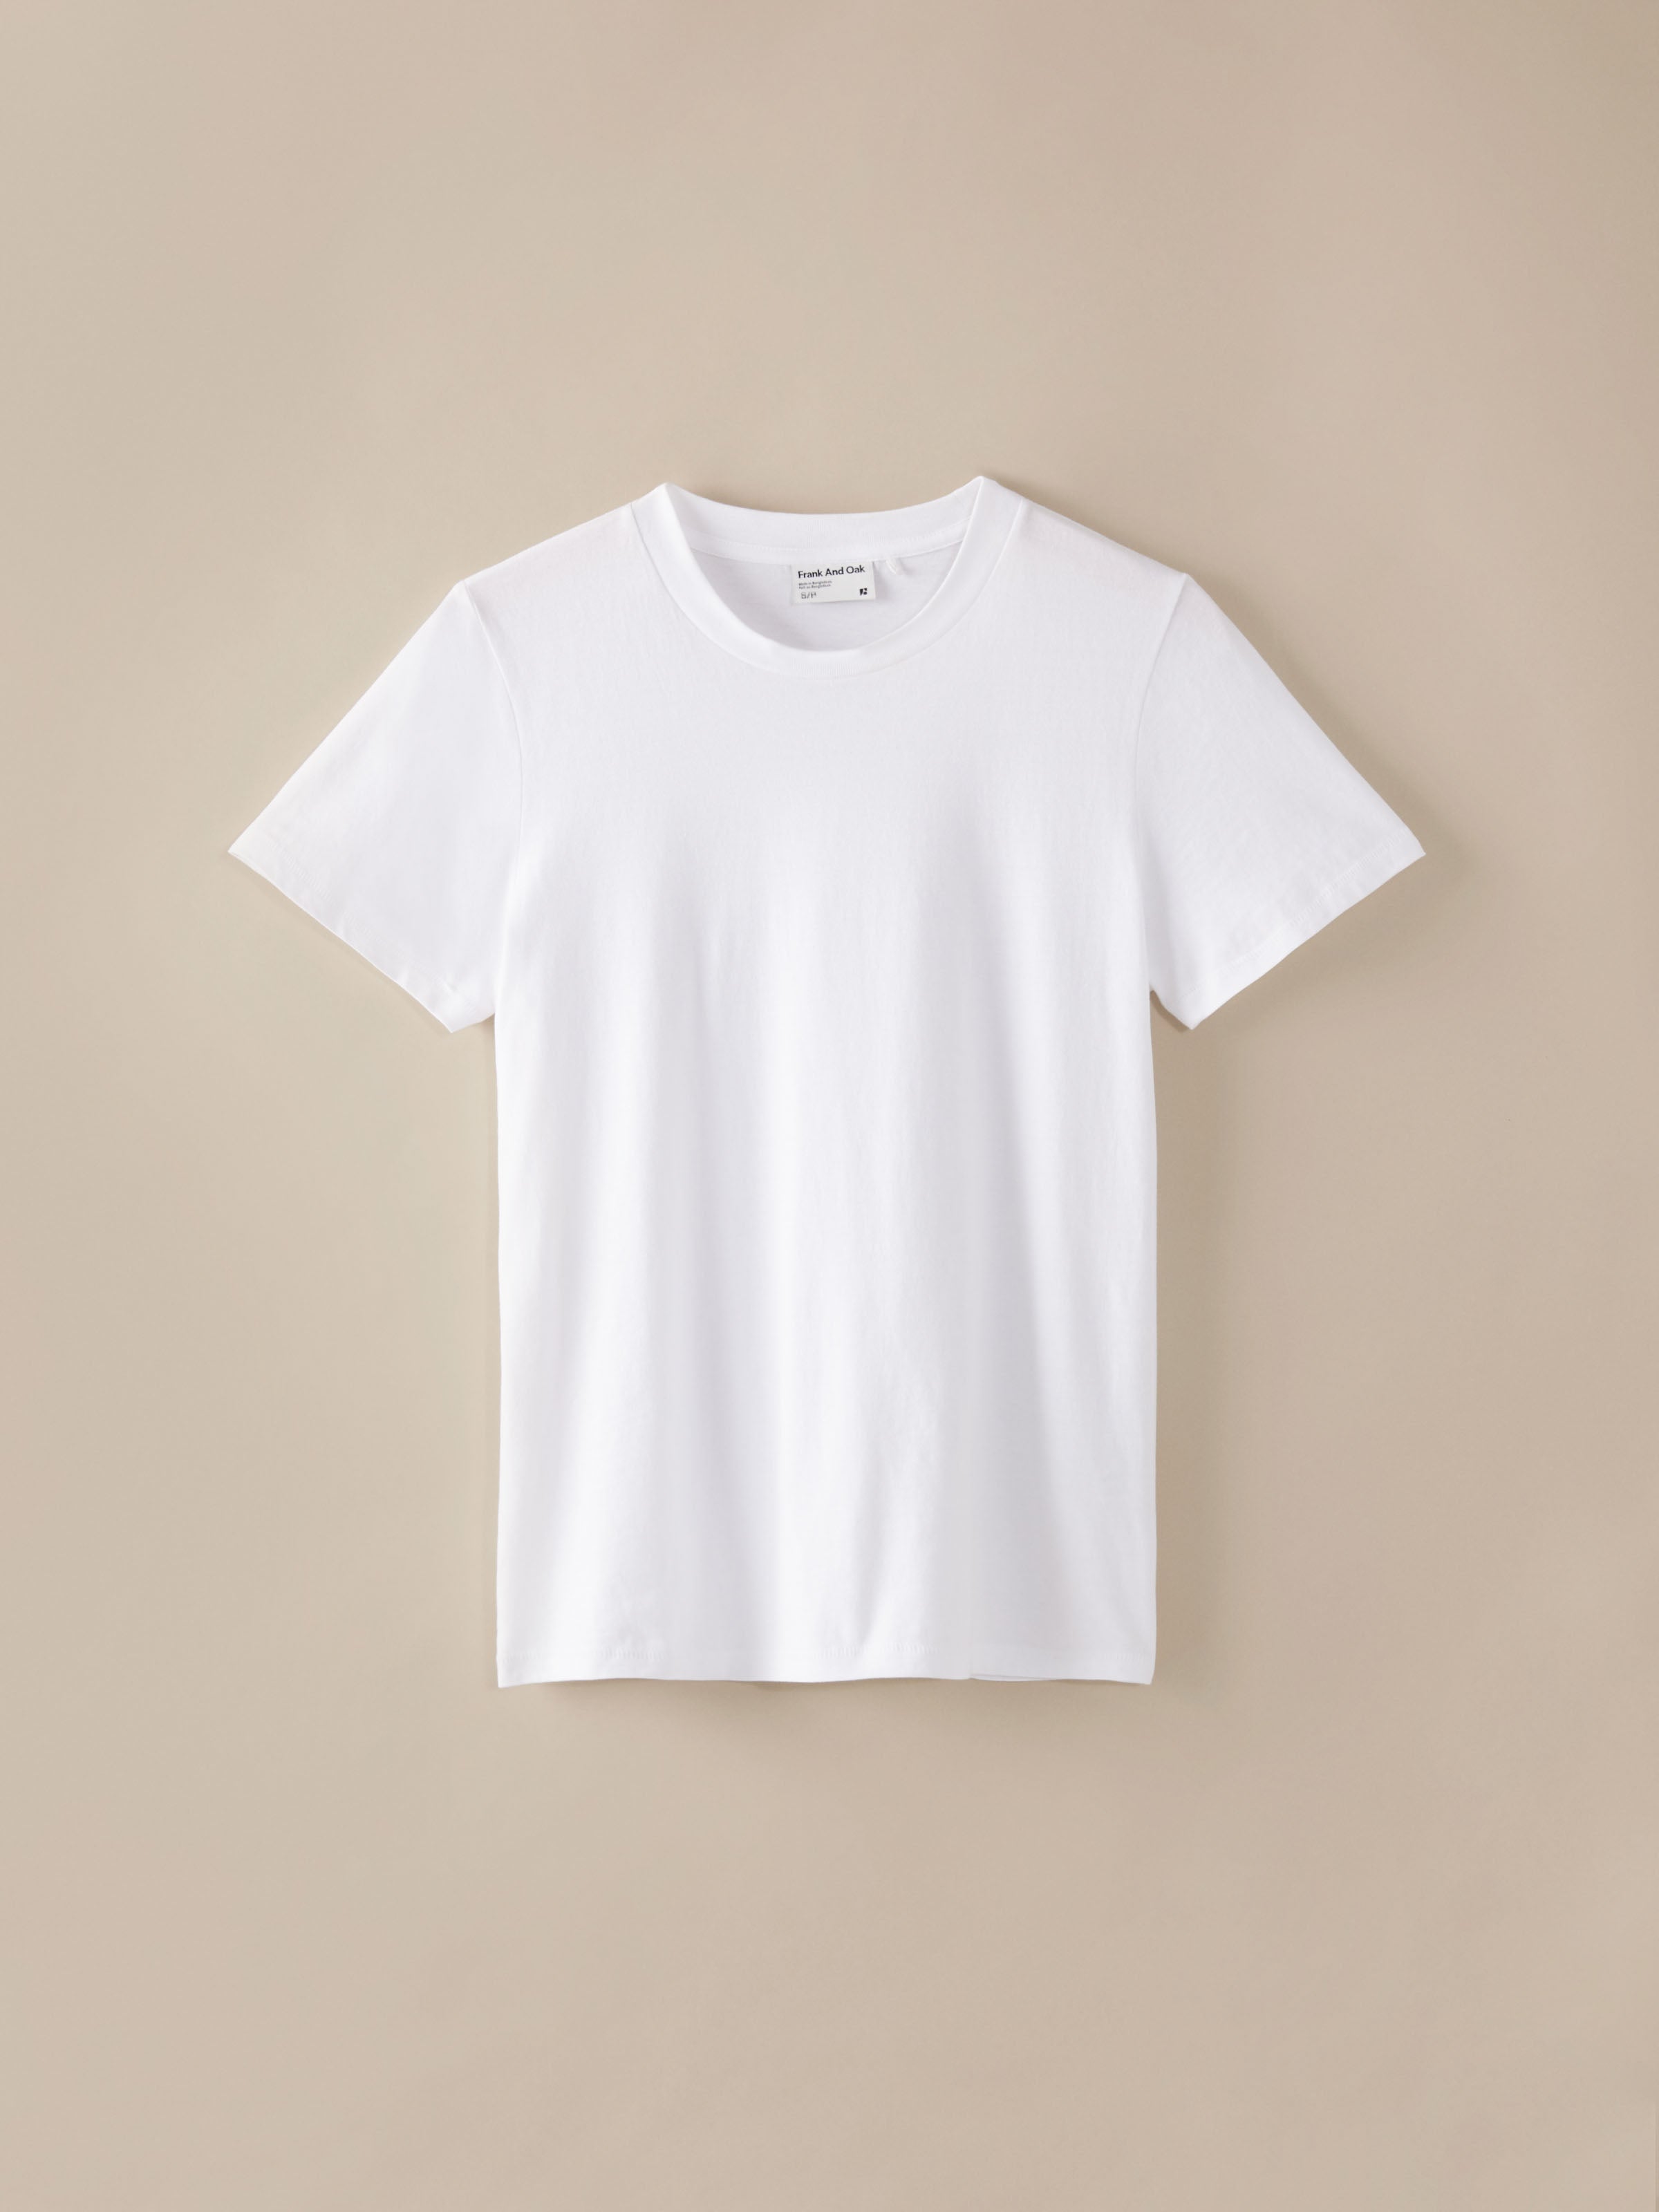 The Essential T-Shirt in Bright White